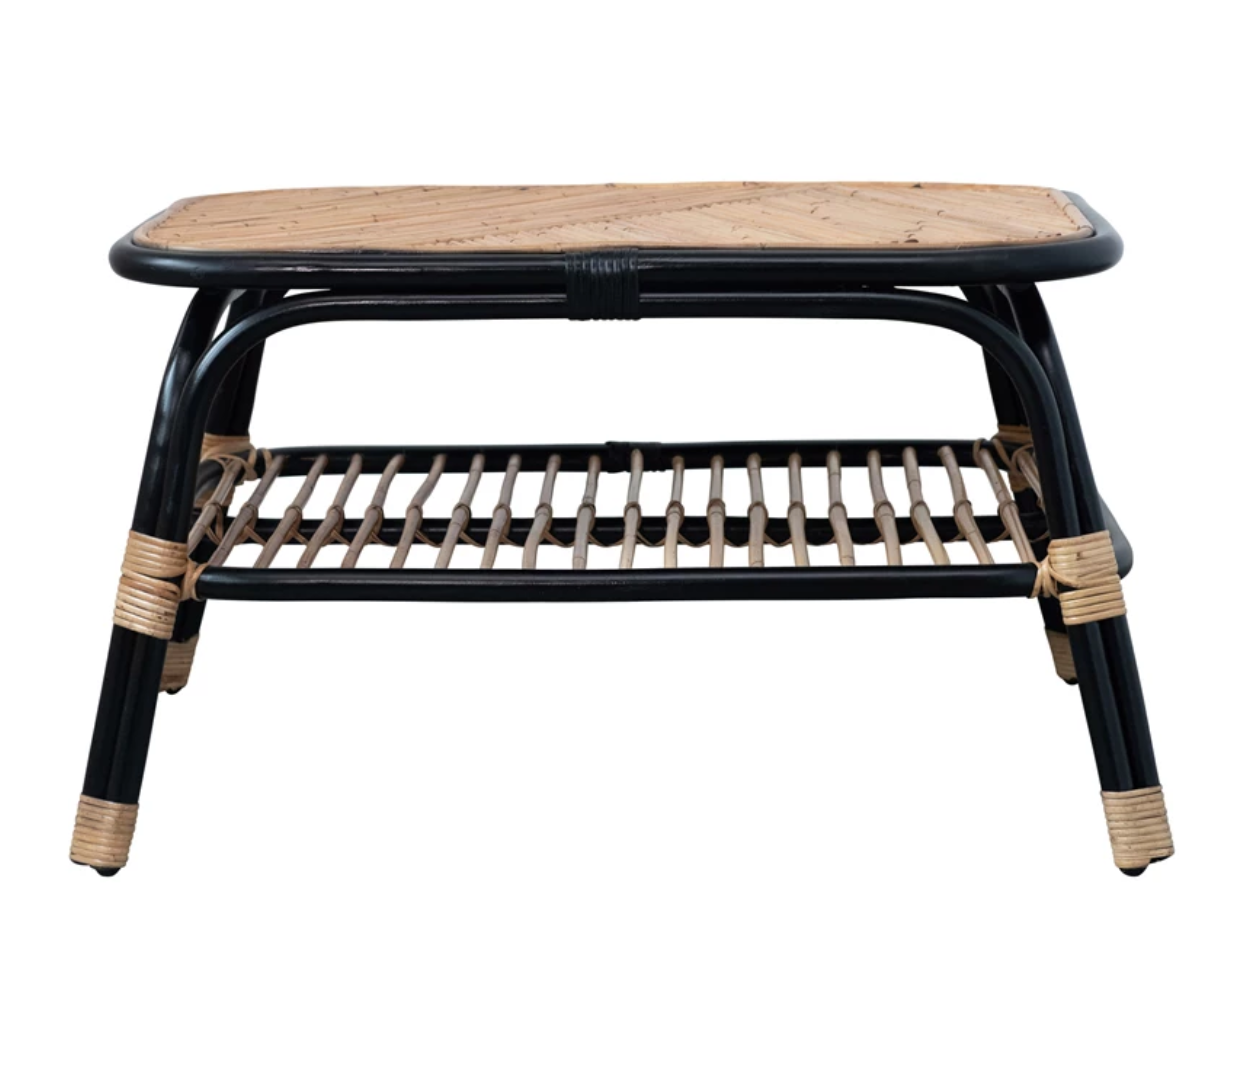 Hand-Woven Rattan Table with Shelf